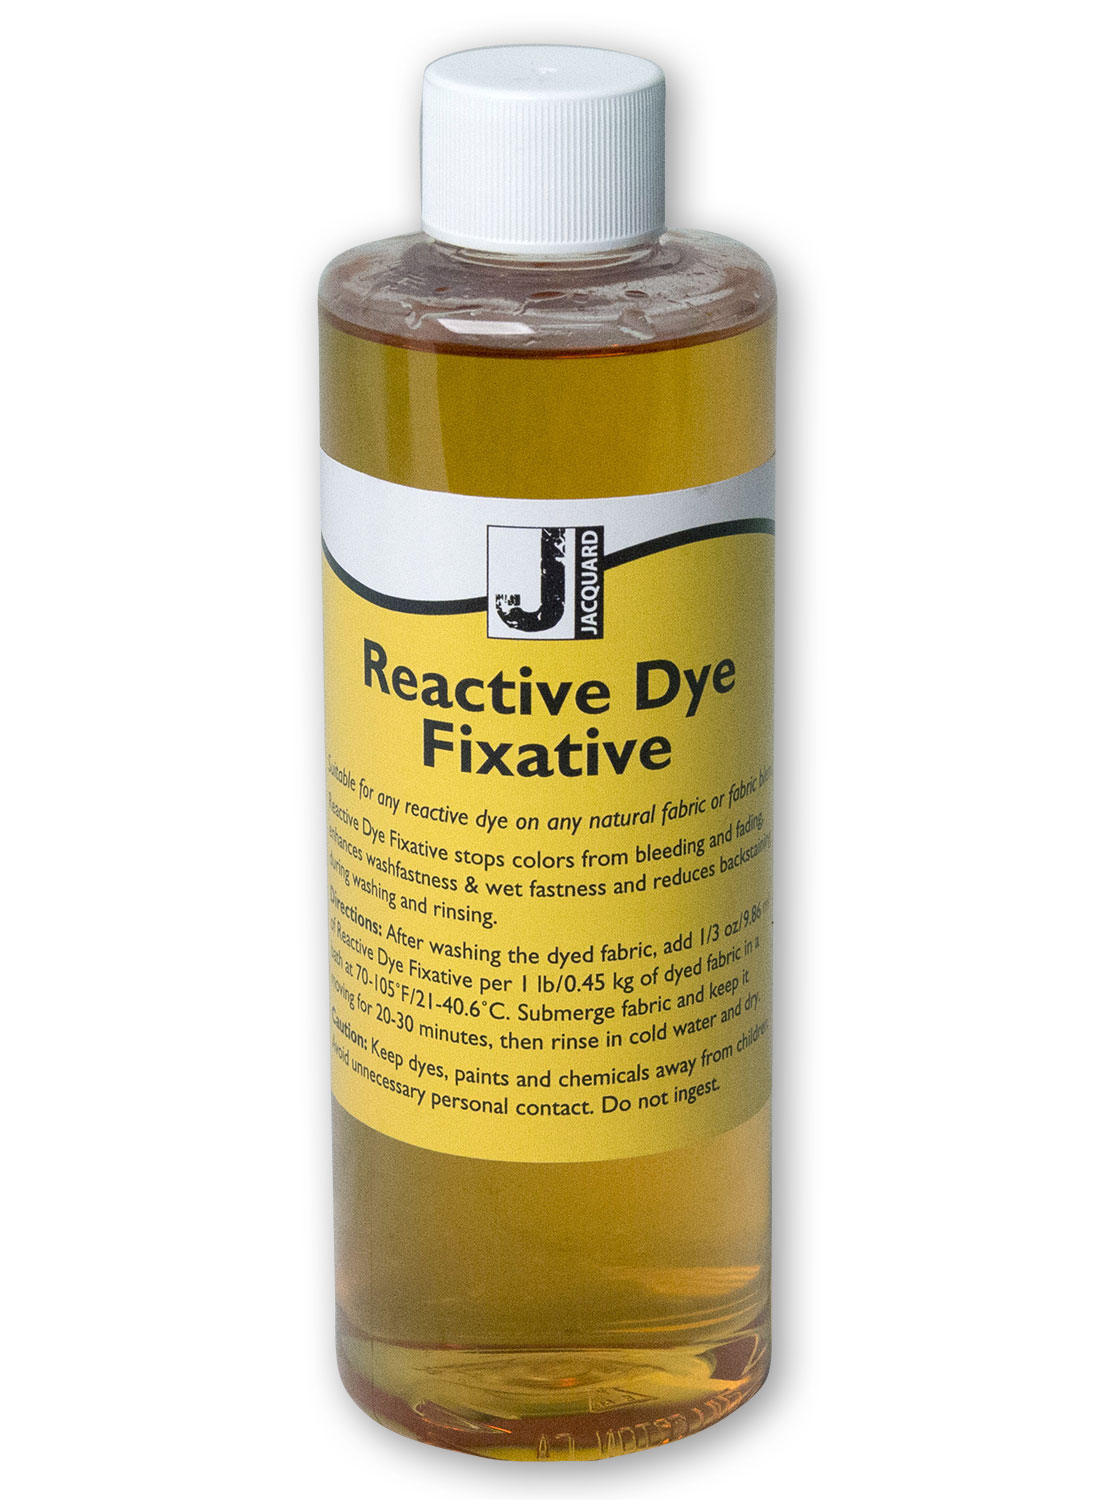 Jacquard Products — Jacquard Products - Chemicals - Reactive Dye